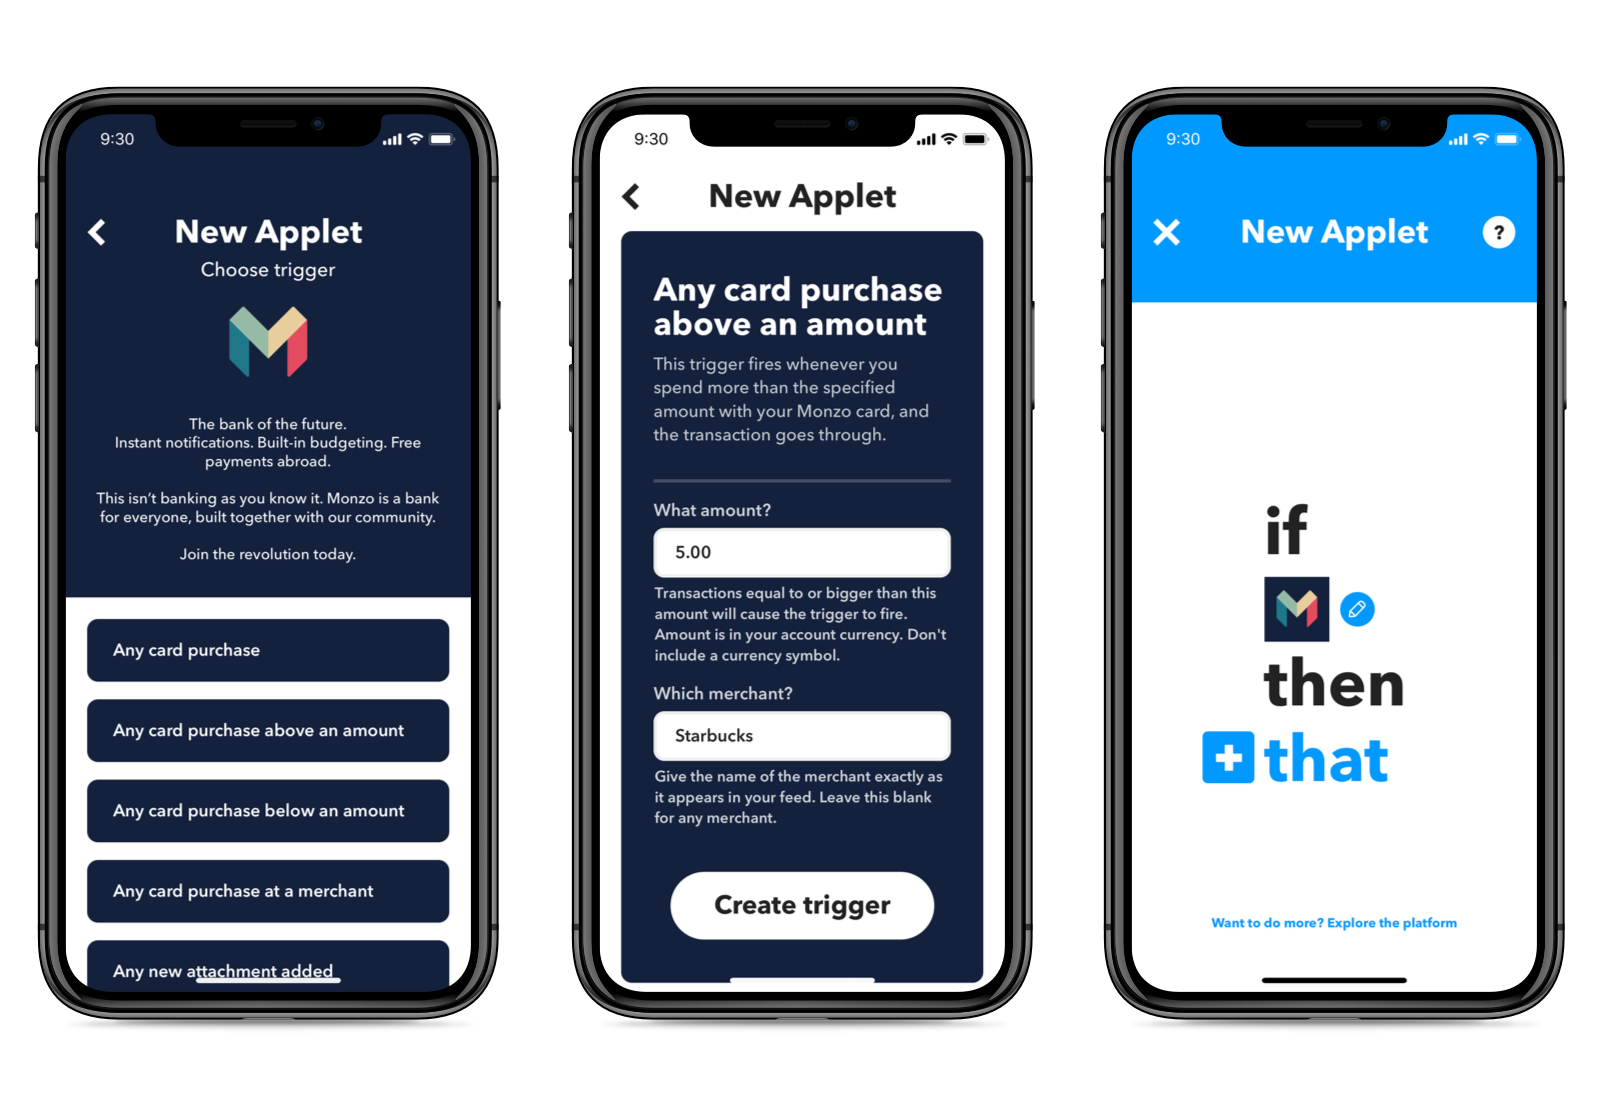 how to create an applet